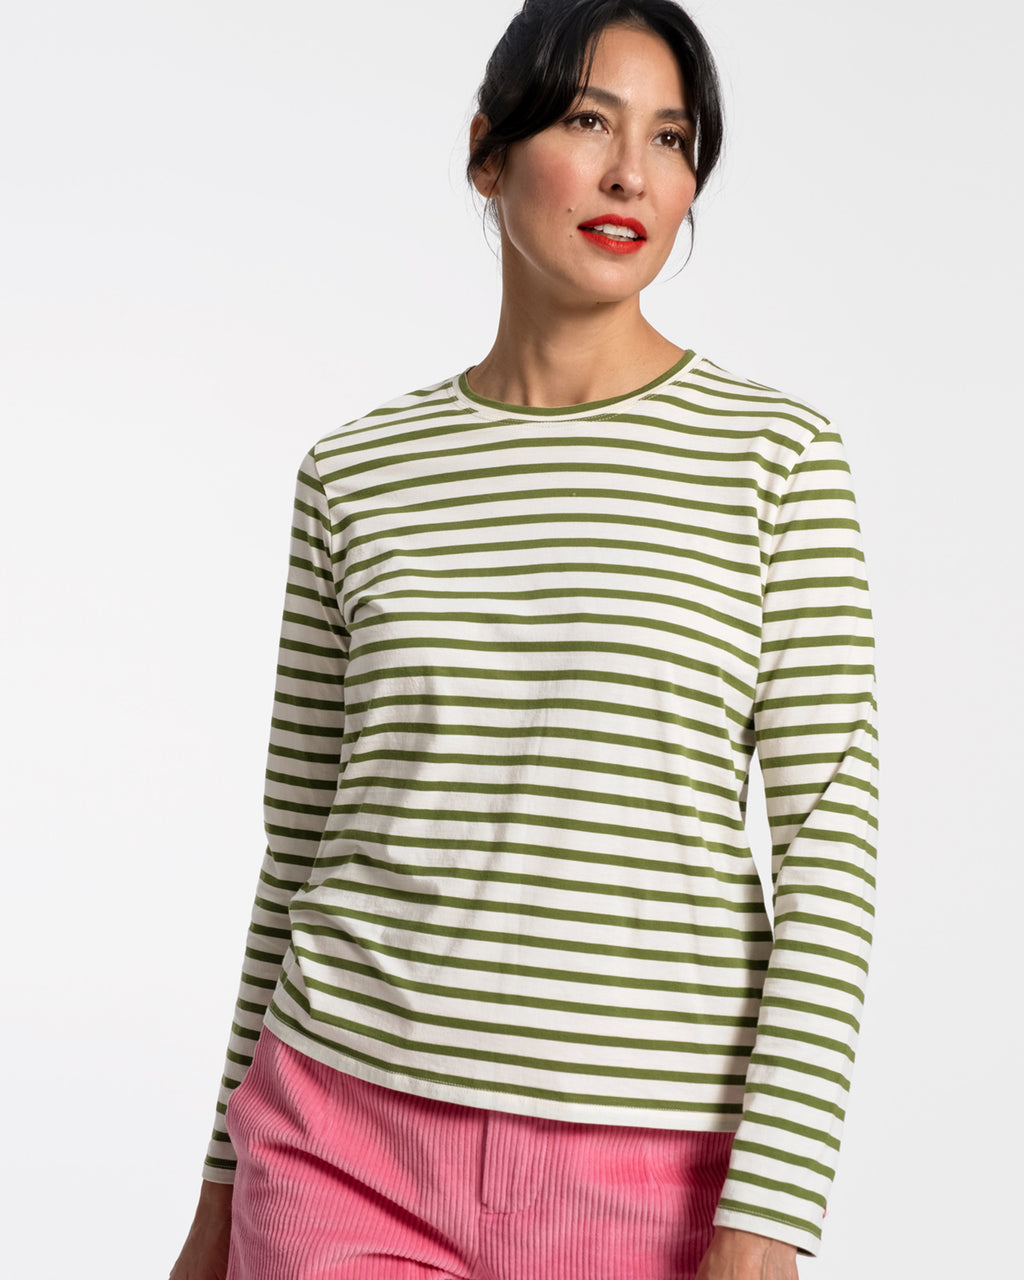 Oyster Shirt Green Striped Sleeve | Frances Valentine Long